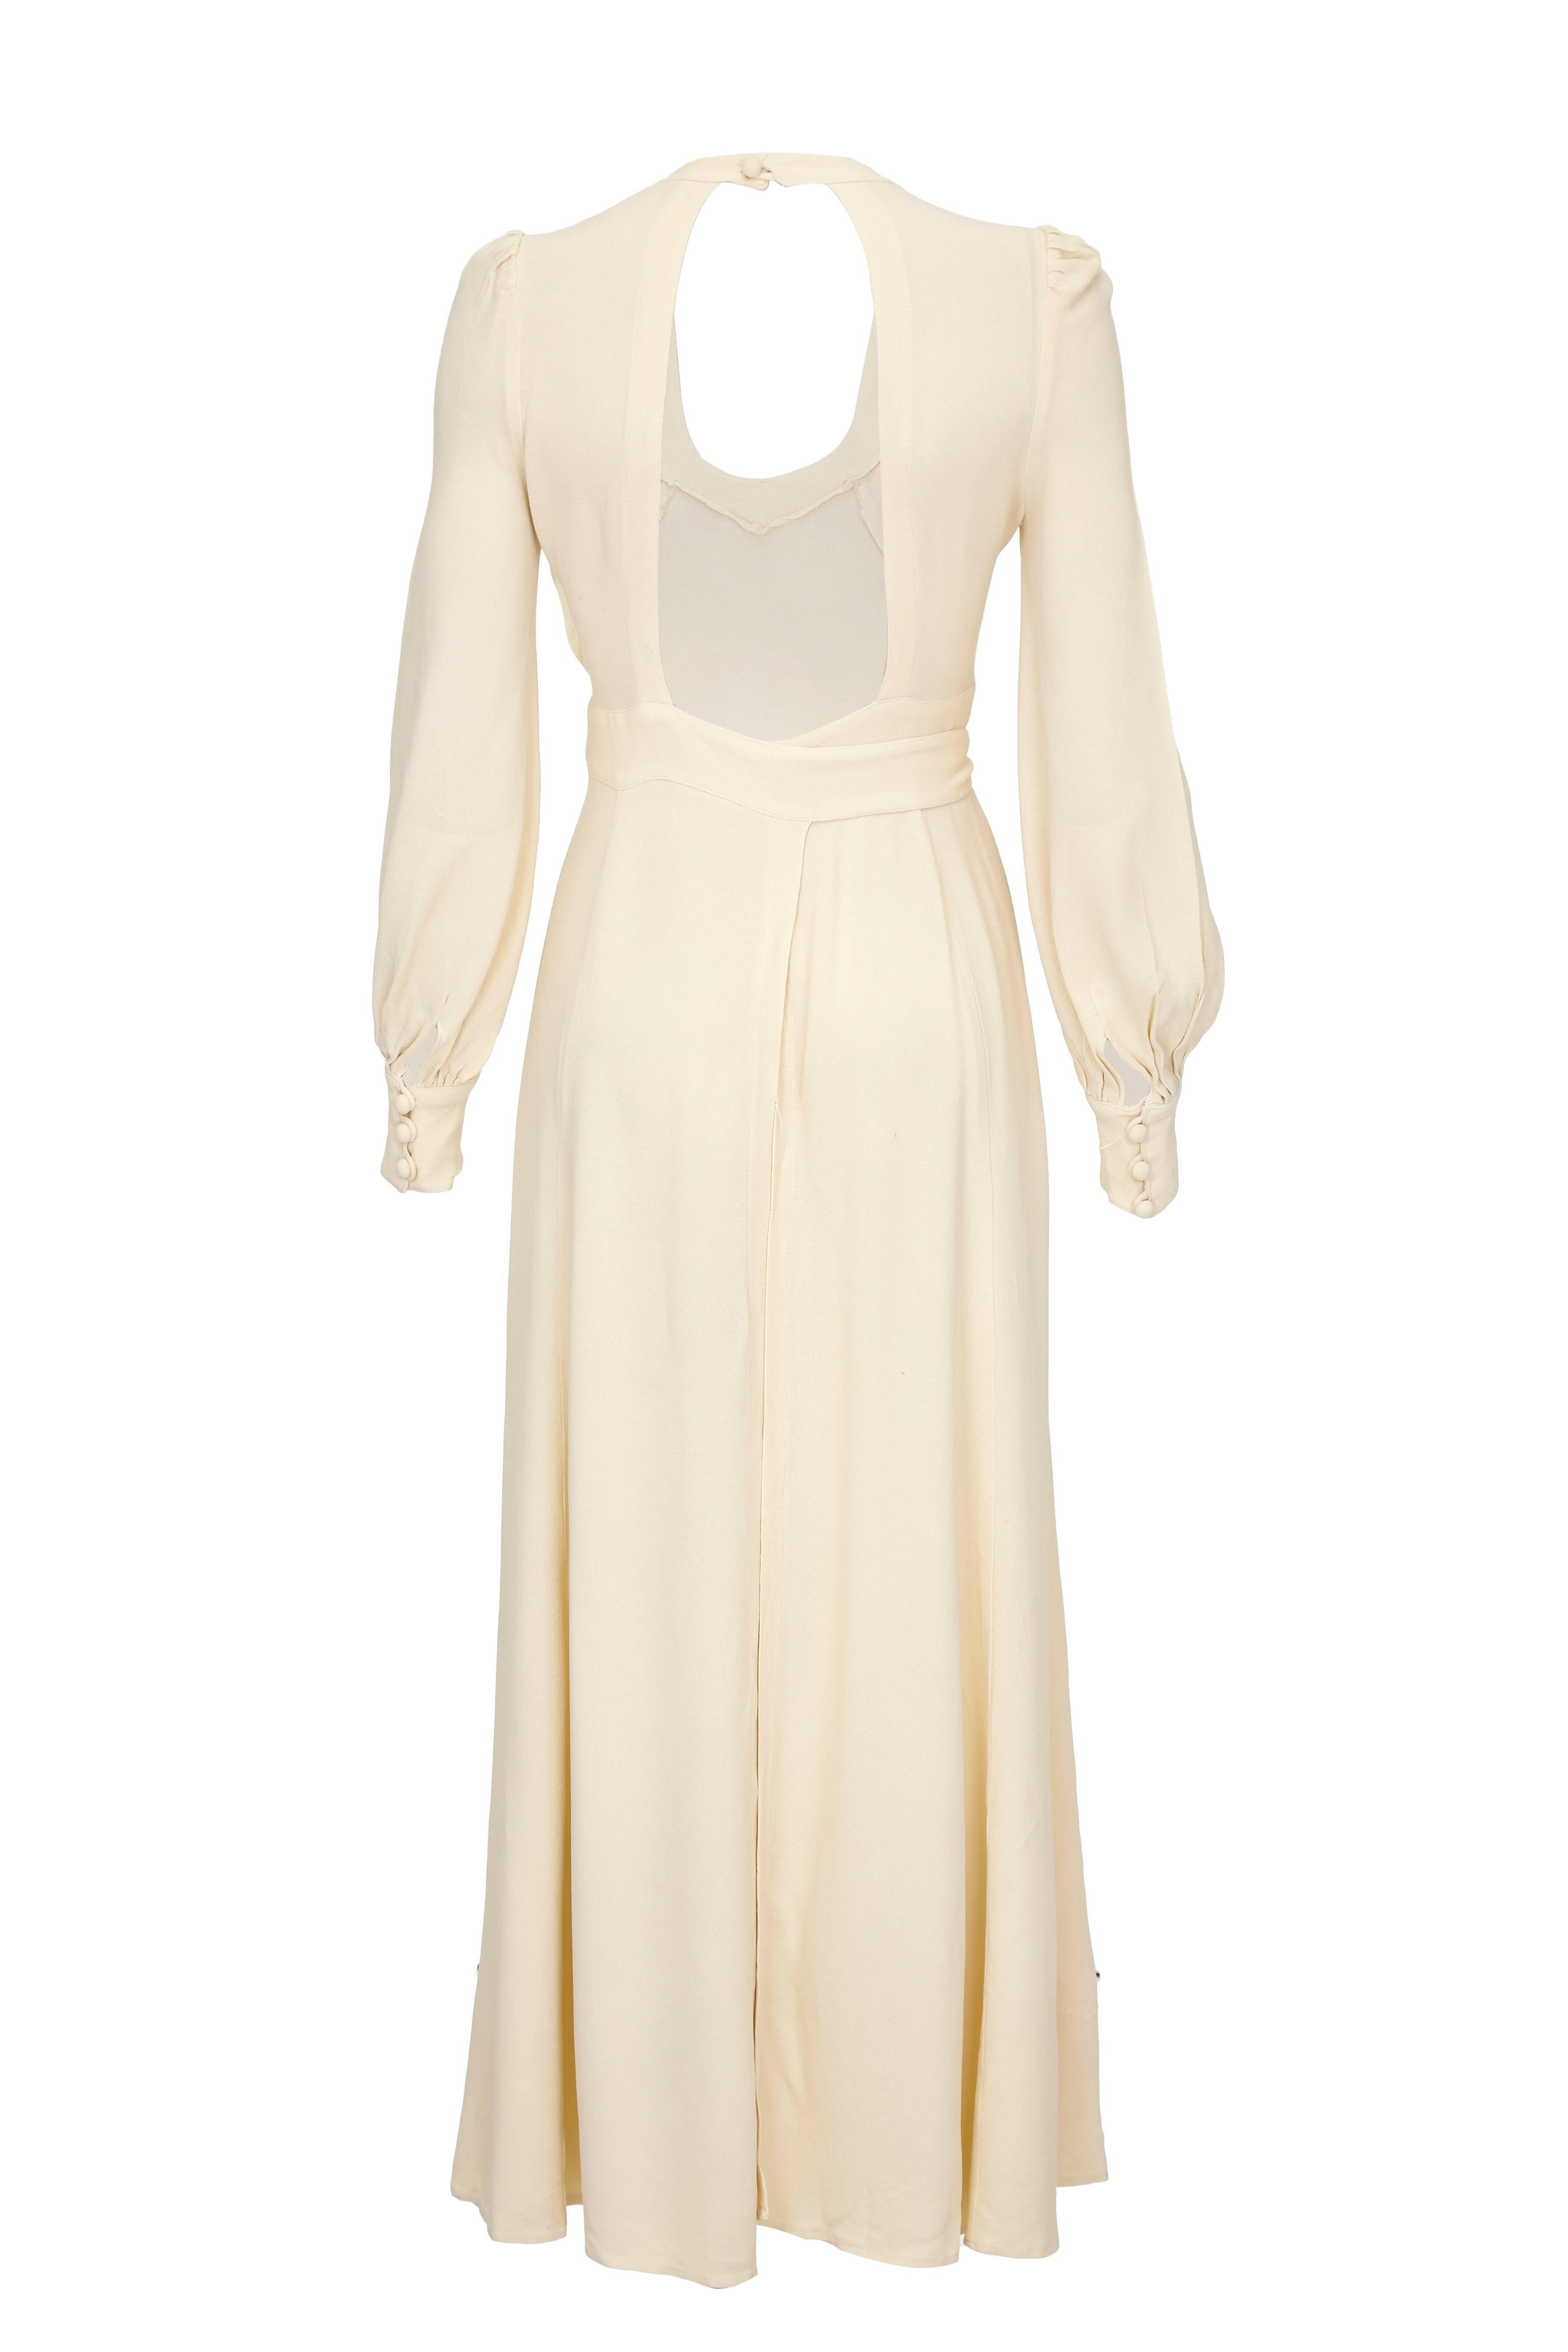 Beautiful vintage 1970s Ossie Clark for Radley moss crepe, full length wrap dress.  In classic Ossic Clark style it features cuffed long sleeves, open back and tie at the waist.   It is slightly flexible in size due to the wrap style but we feel